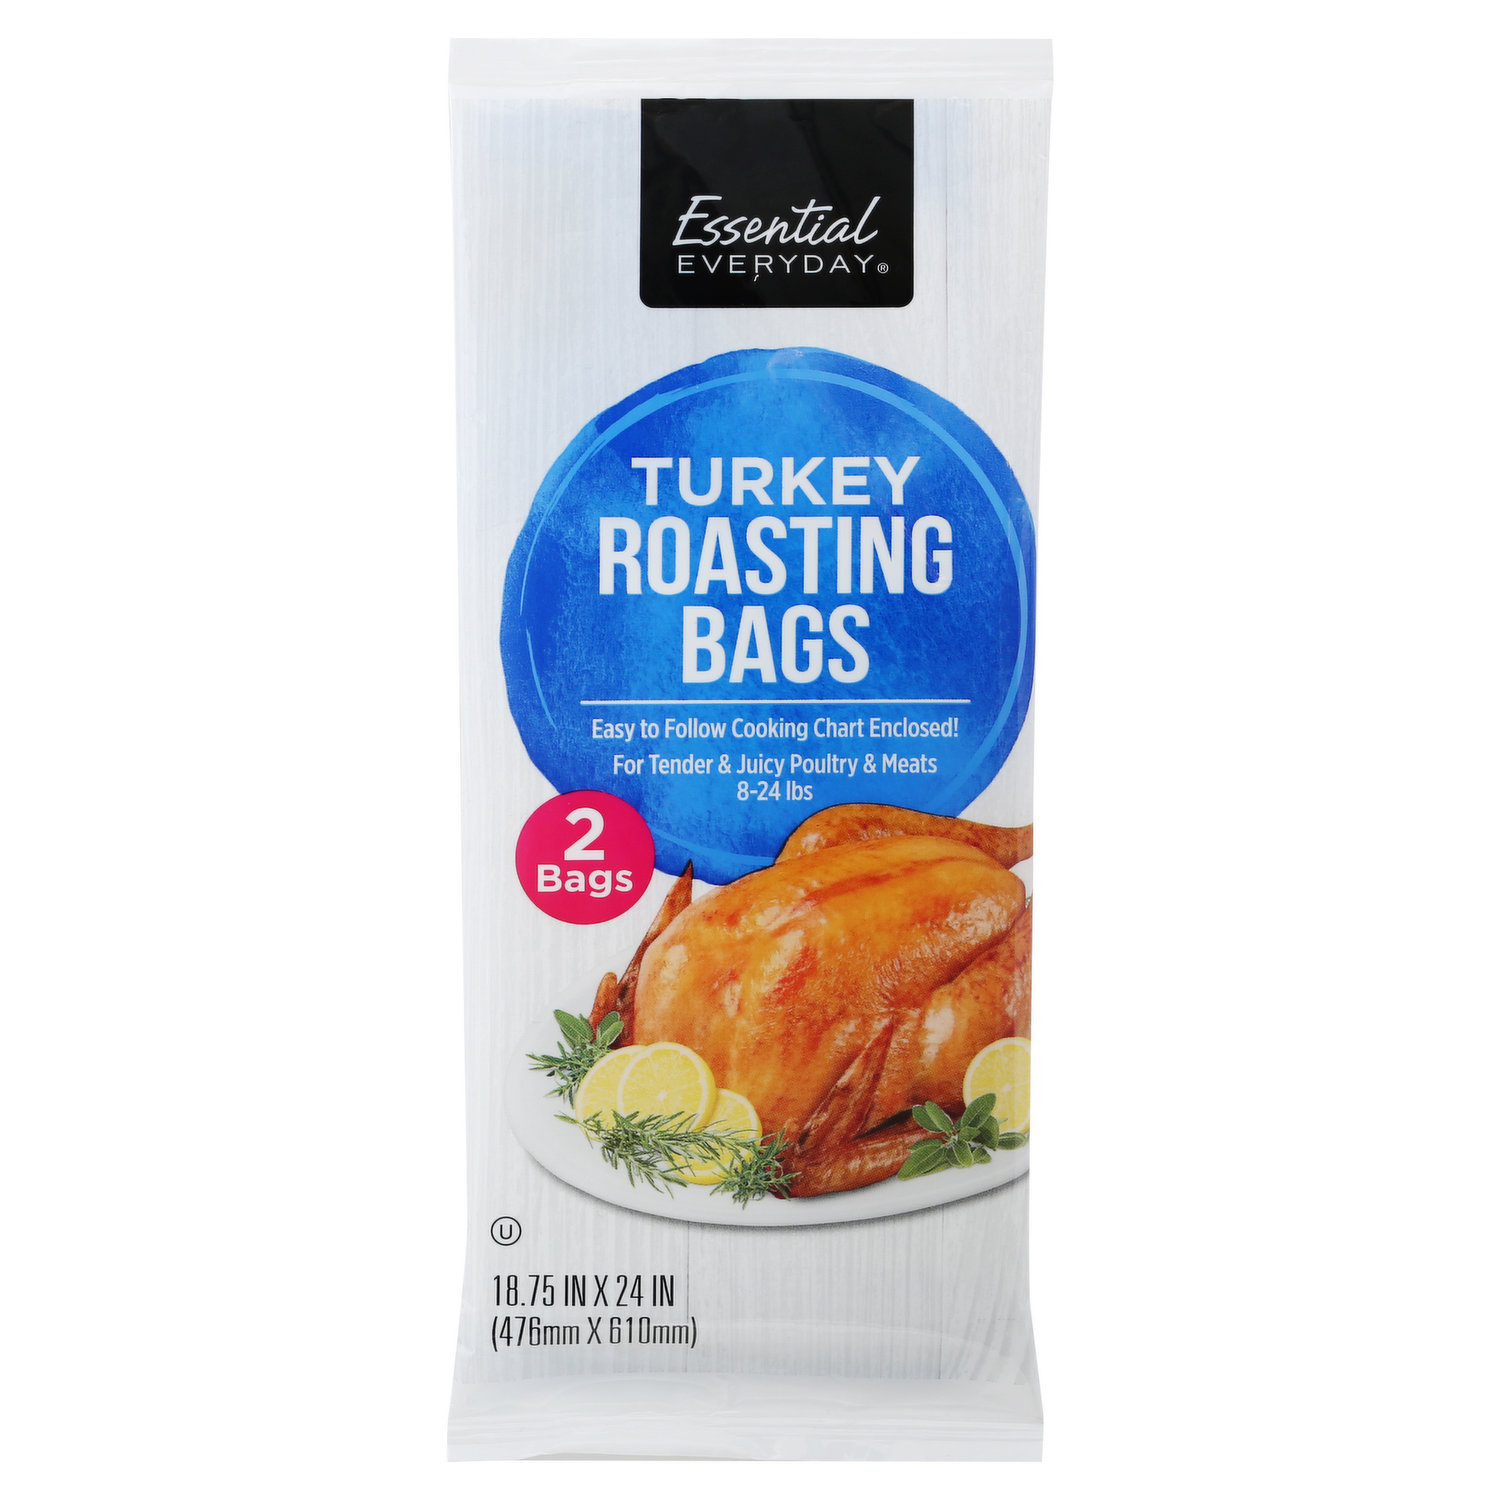 2 XL Size 8-24 Pound Large Turkey Baking Bags - 1 Package Oven